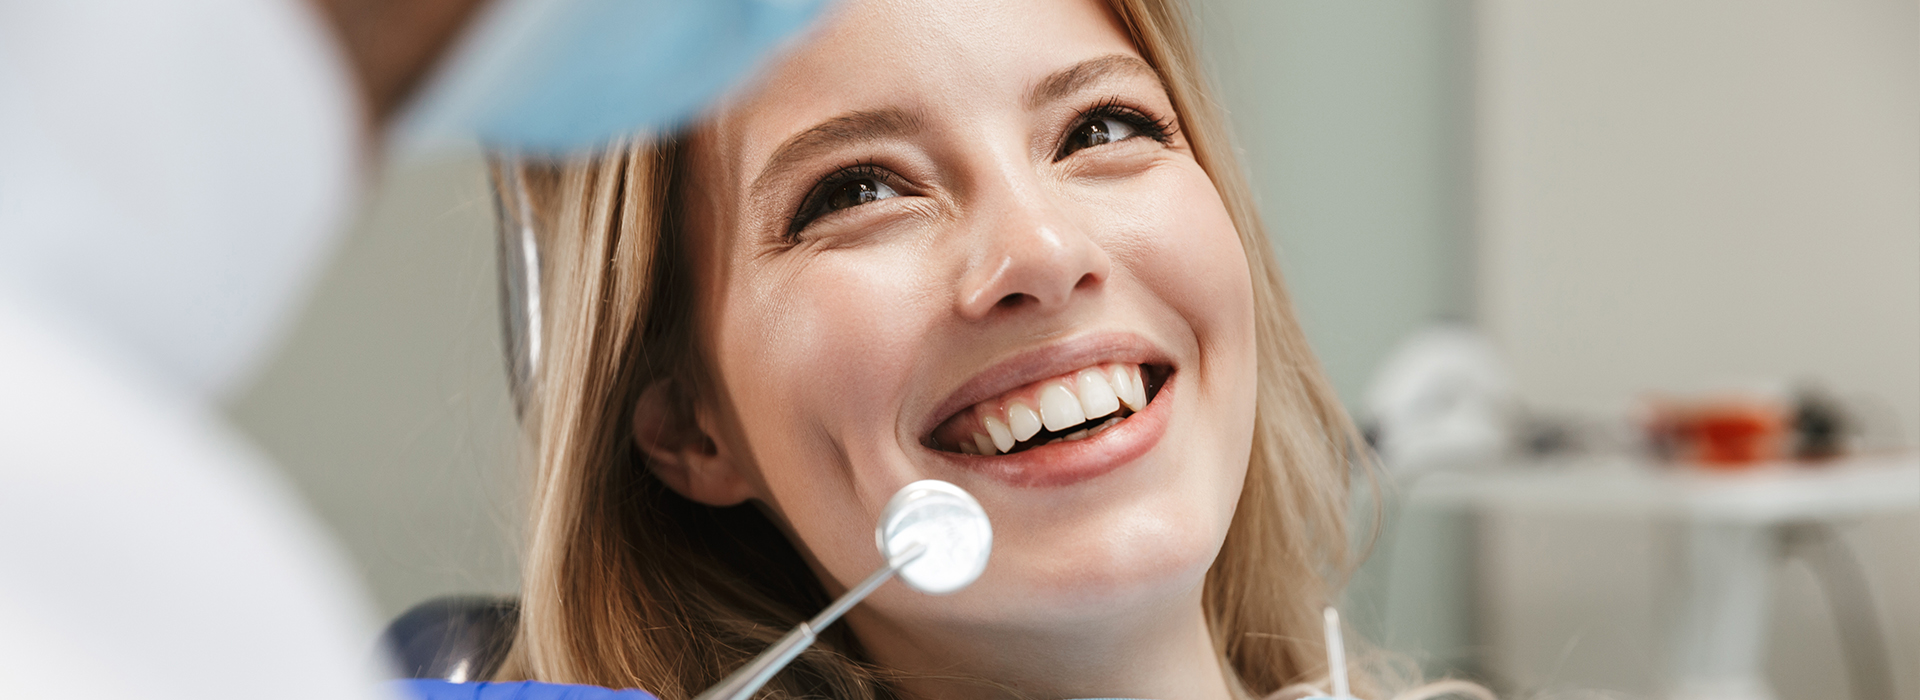 The image shows a woman smiling in front of a dental mirror, with a dentist wearing a mask and gloves behind her.